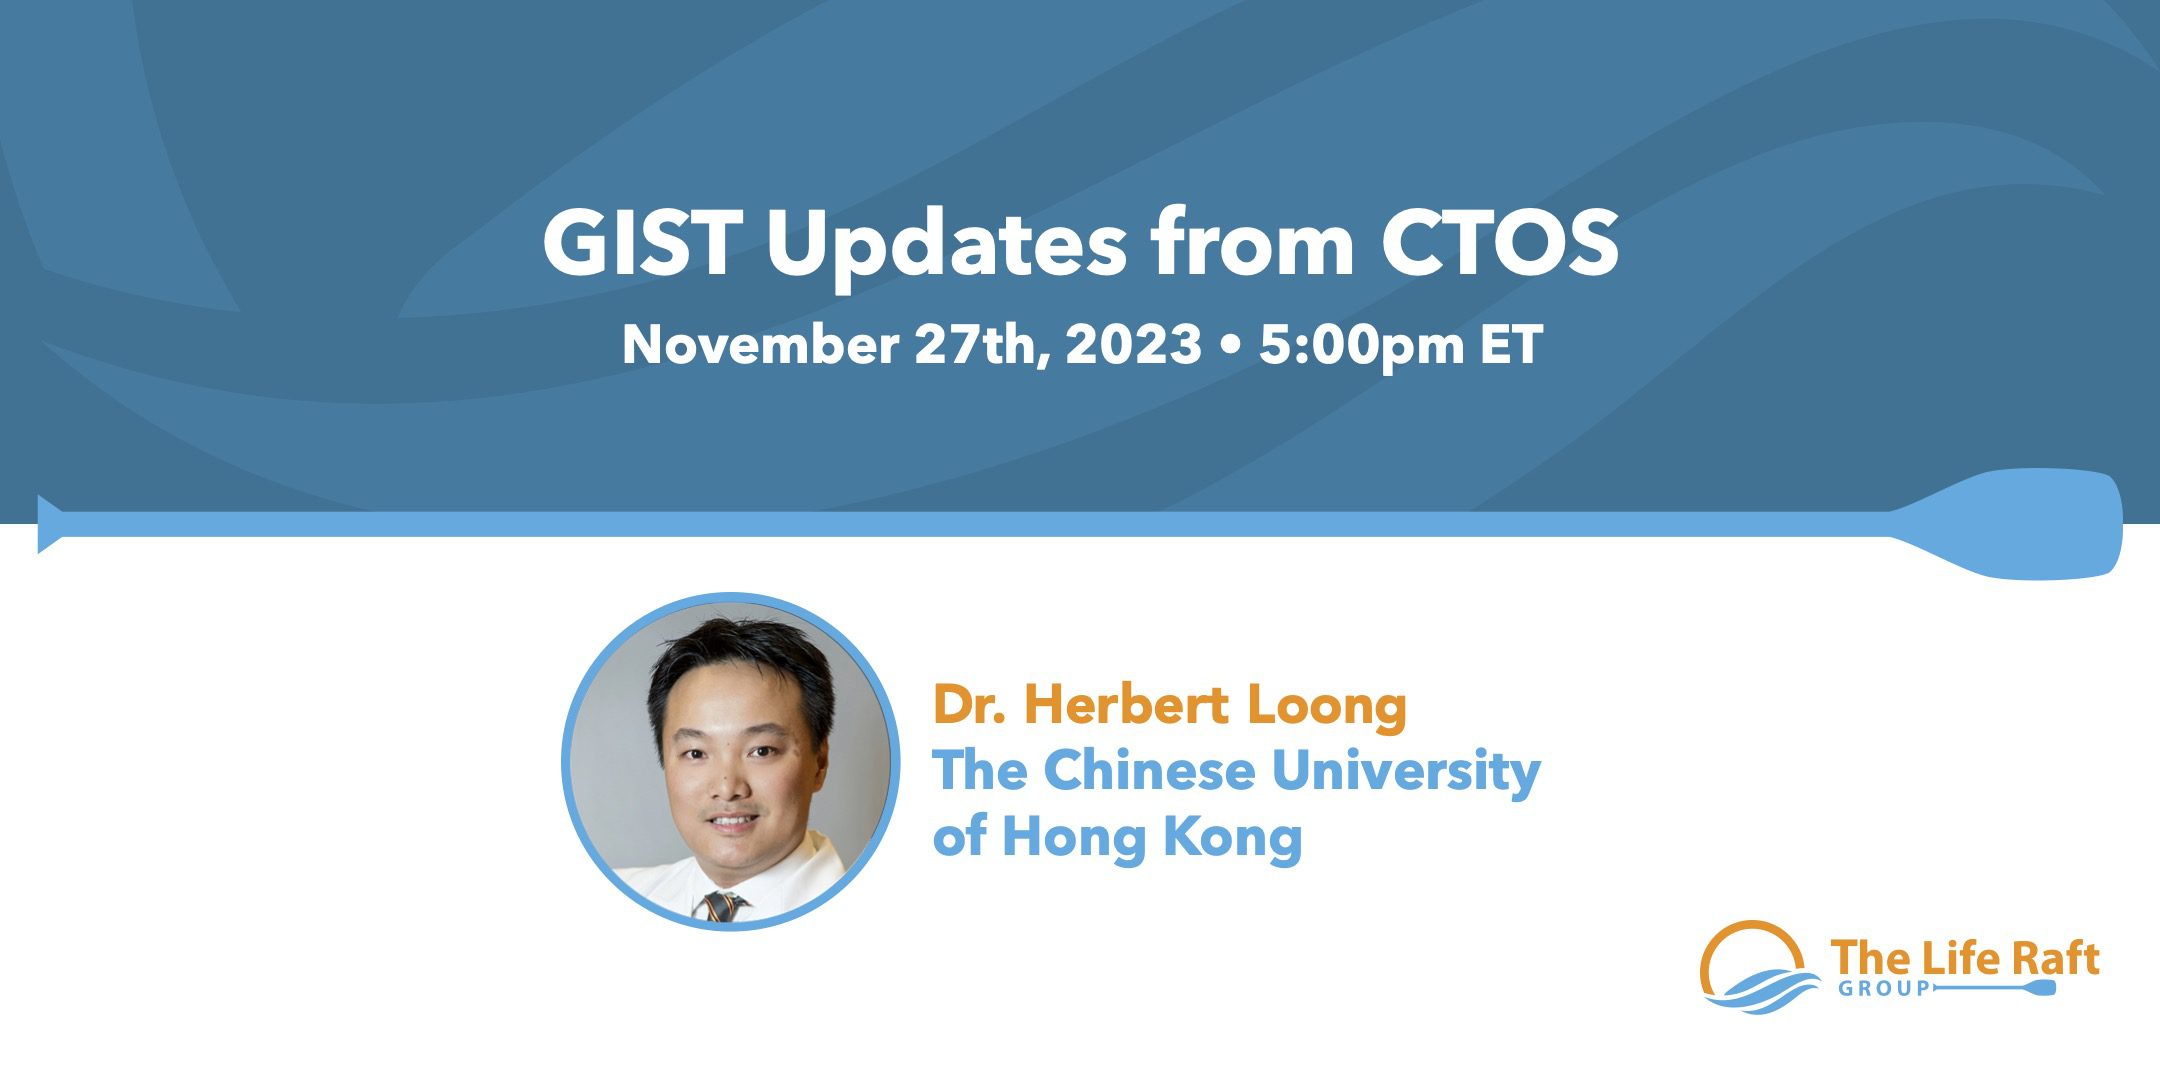 updated banner for GIST Updates from CTOS